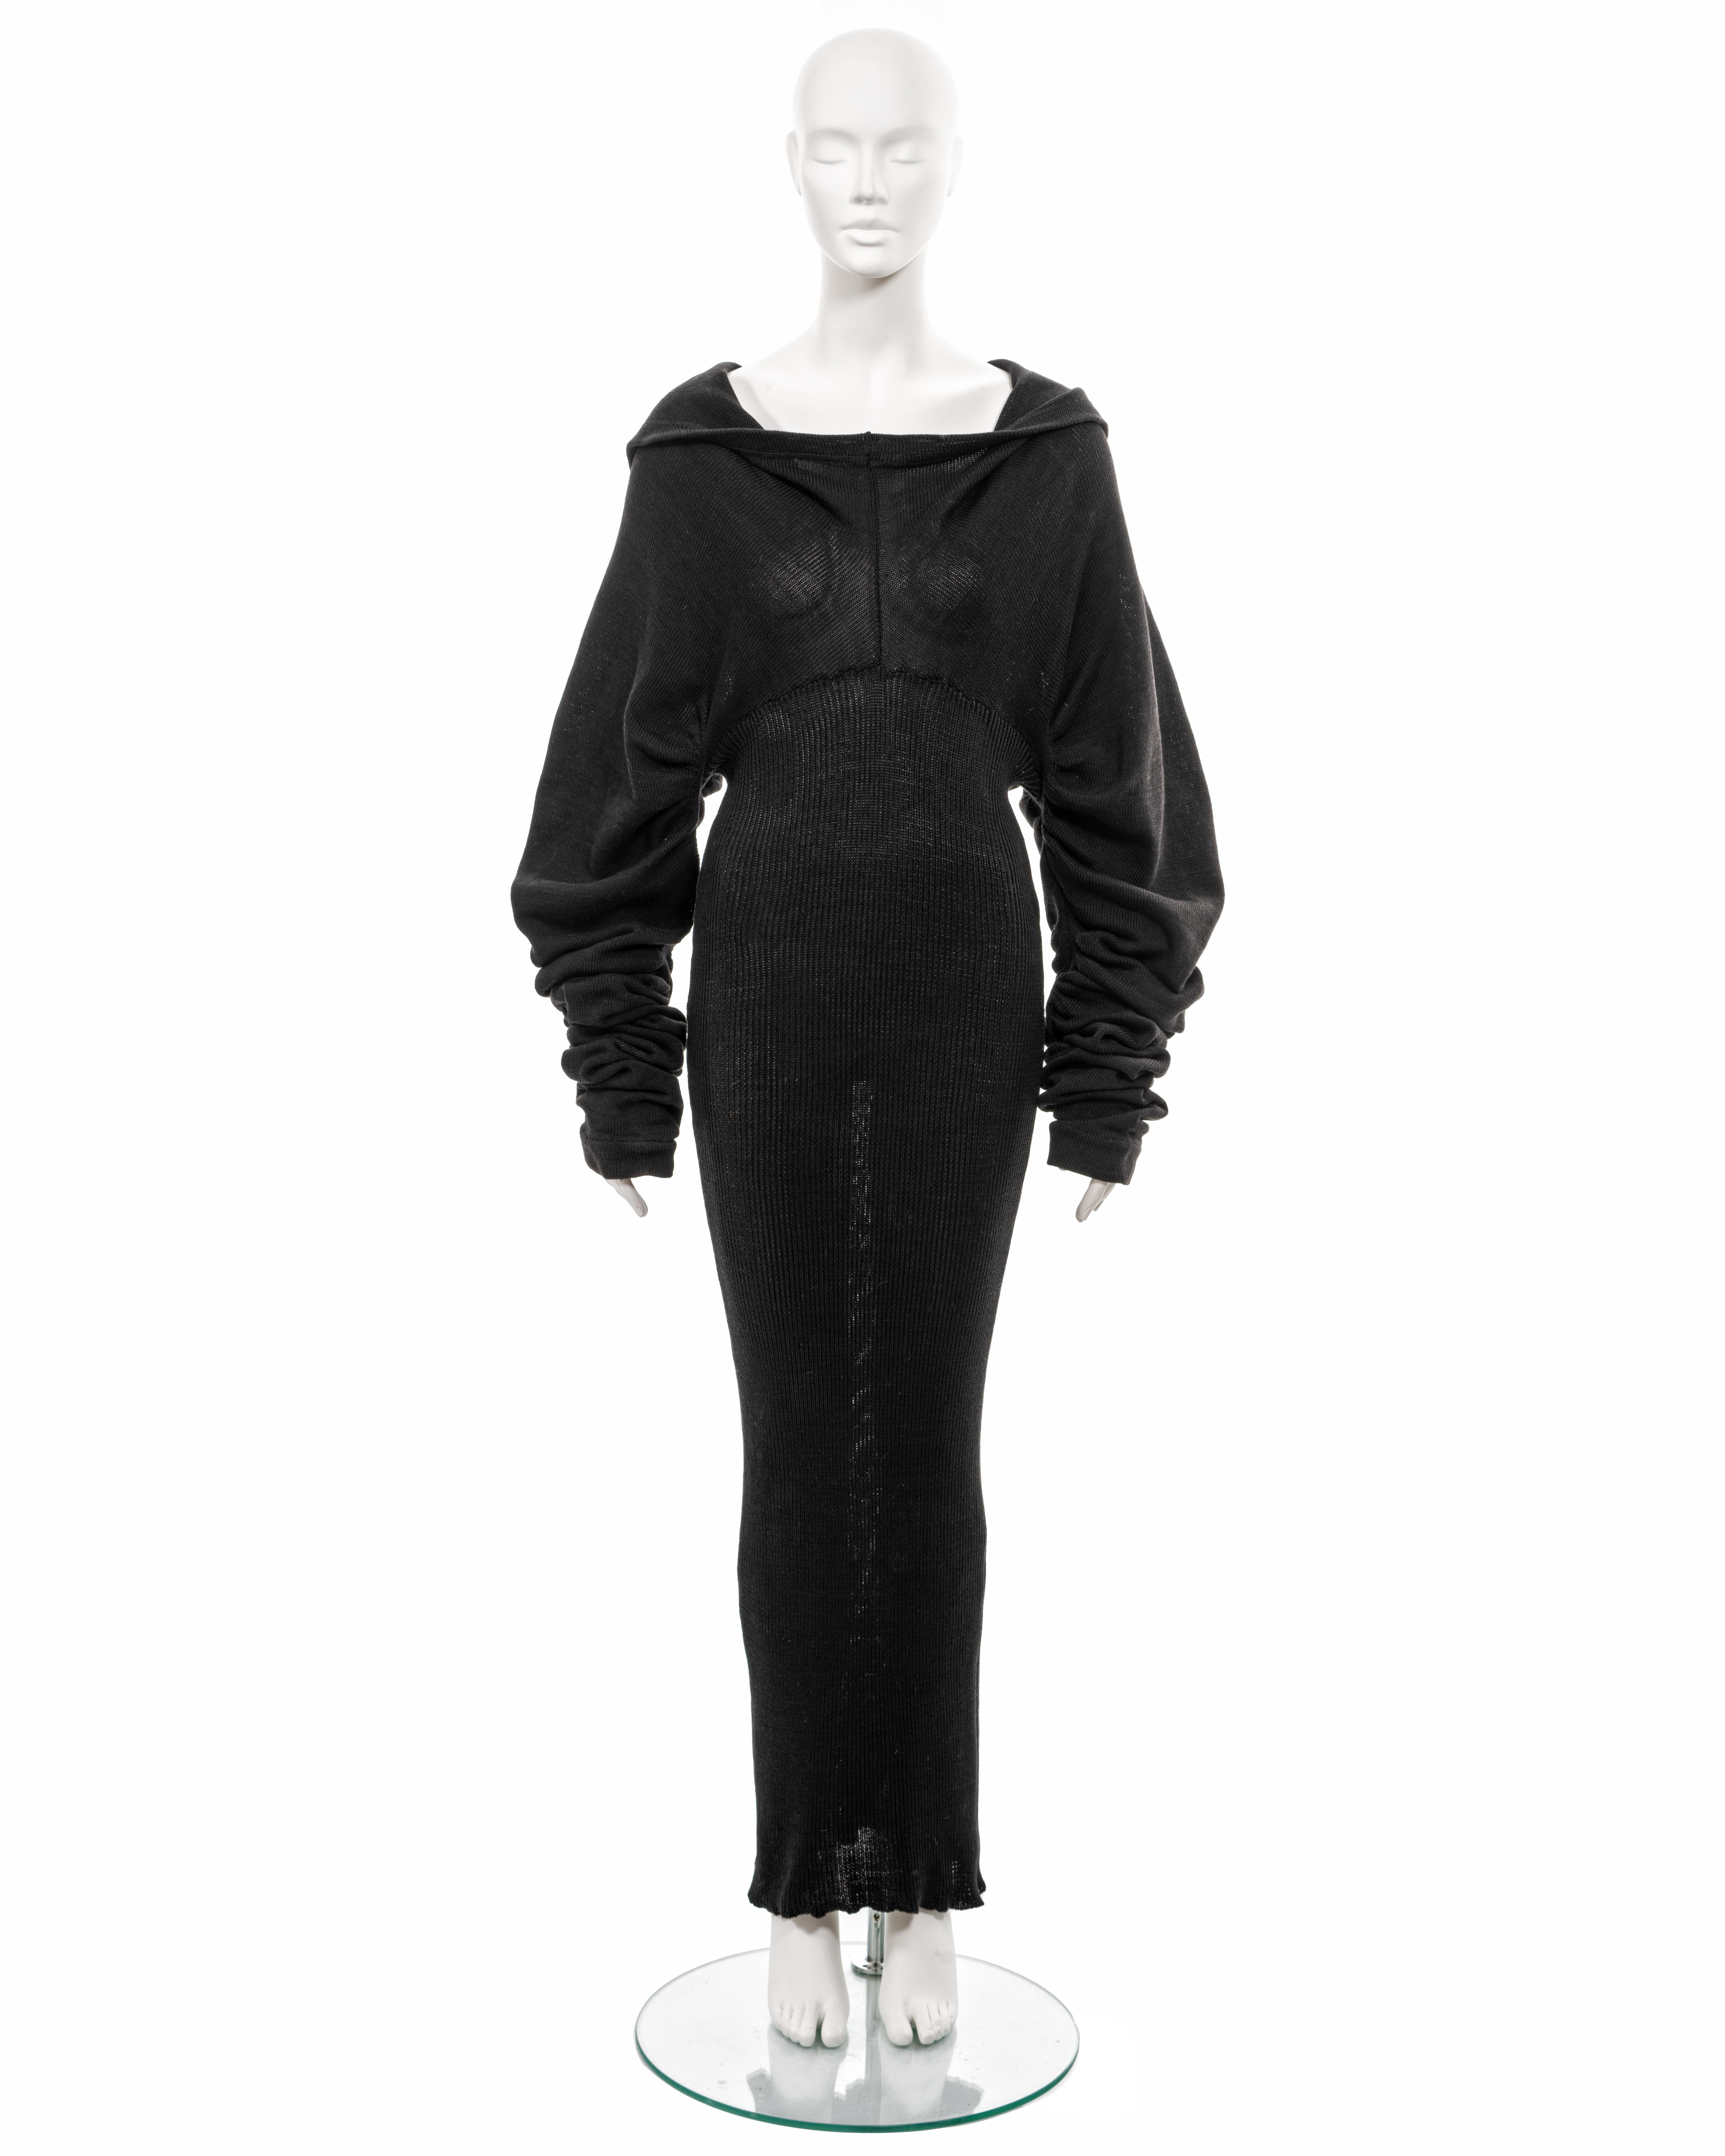 ▪ John Galliano black knitted cotton maxi dress
▪ Sold by One of a Kind Archive
▪ 'The Rose', Fall-Winter 1987
▪ Museum Grade
▪ Deep sailor collar
▪ Gathered circle-cut sleeves 
▪ Fitted tubular wiggle skirt 
▪ 100% Cotton
▪ UK10 - FR38 - US6
▪ Made